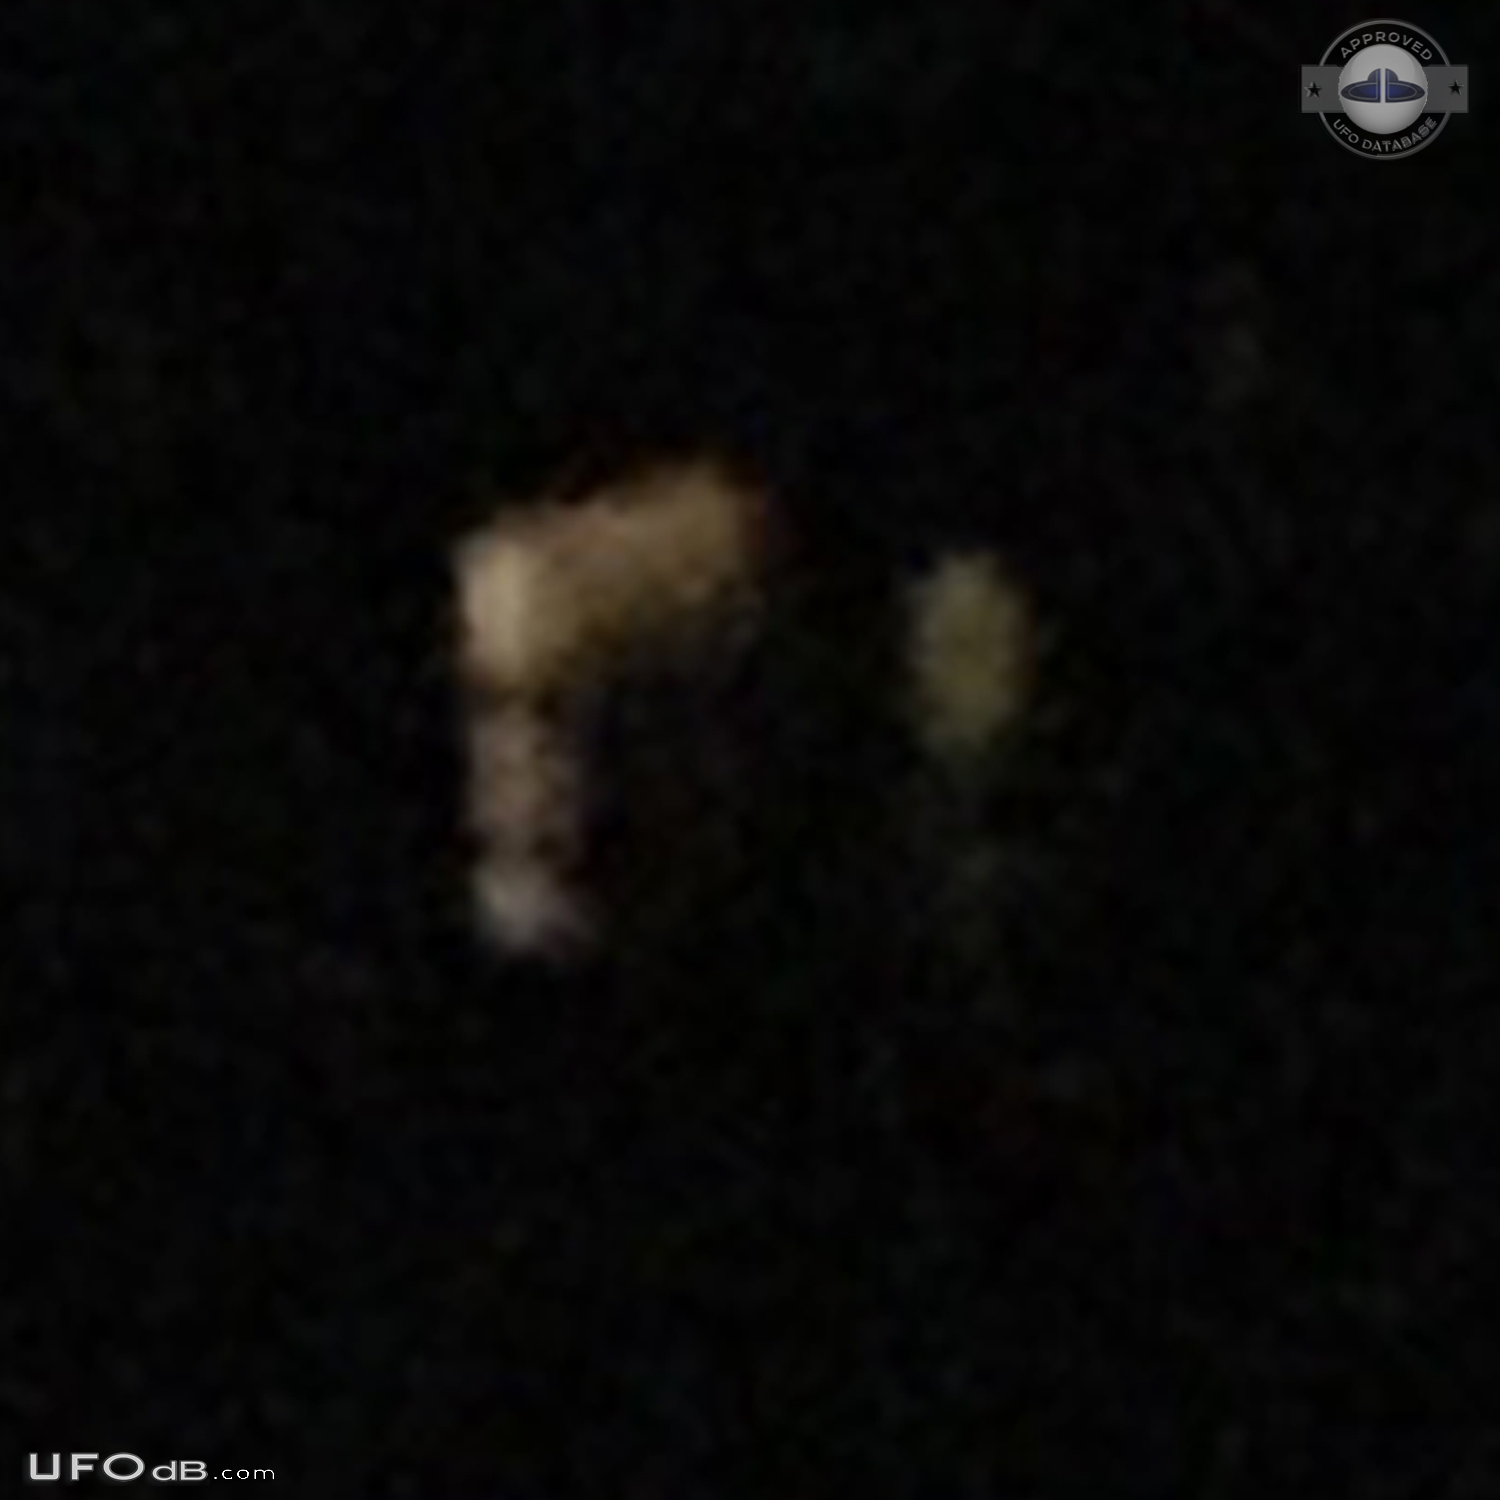 Wife see strange looking UFO and take picture - Pawling New York USA 2 UFO Picture #785-5